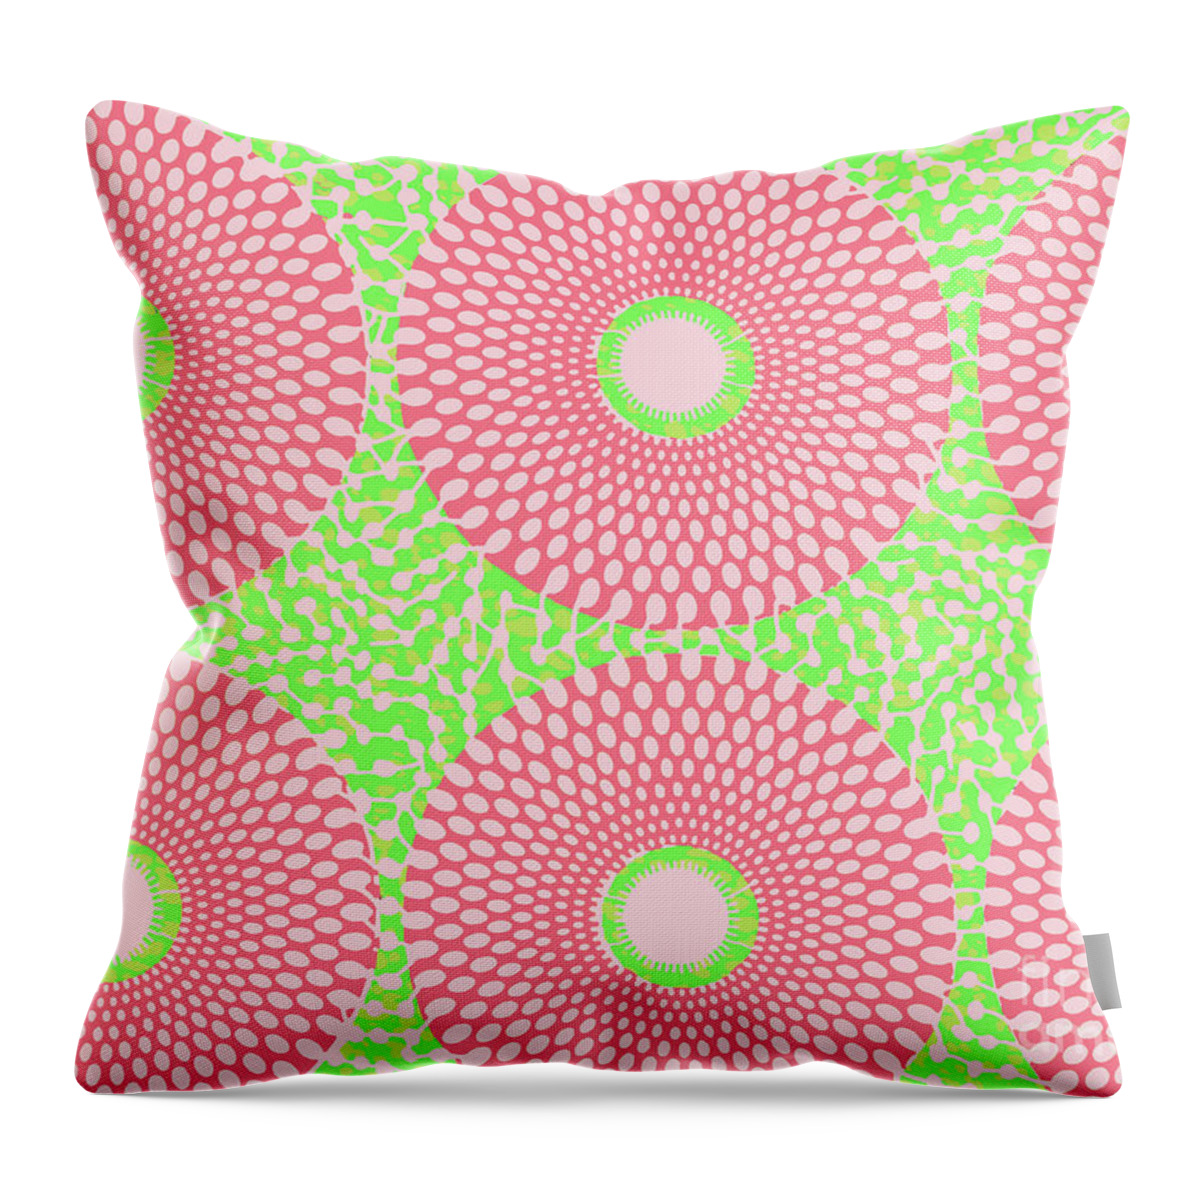 Hbcu Throw Pillow featuring the digital art Pink And Green by Scheme Of Things Graphics